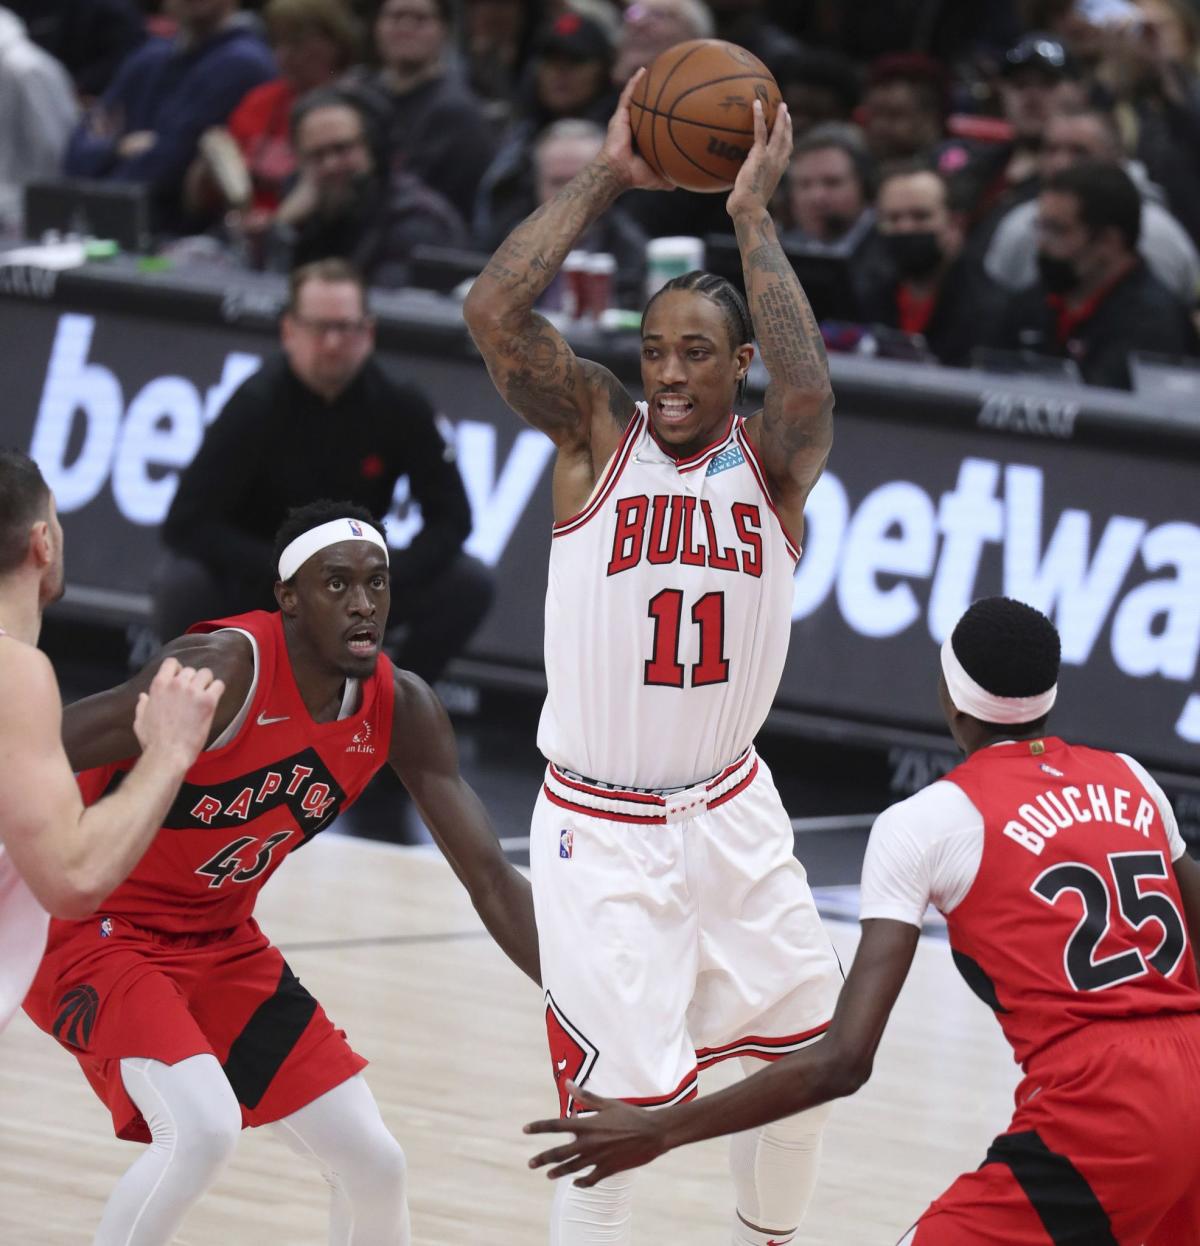 LaVine puts his stamp on Bulls' stunning play-in comeback over Raptors